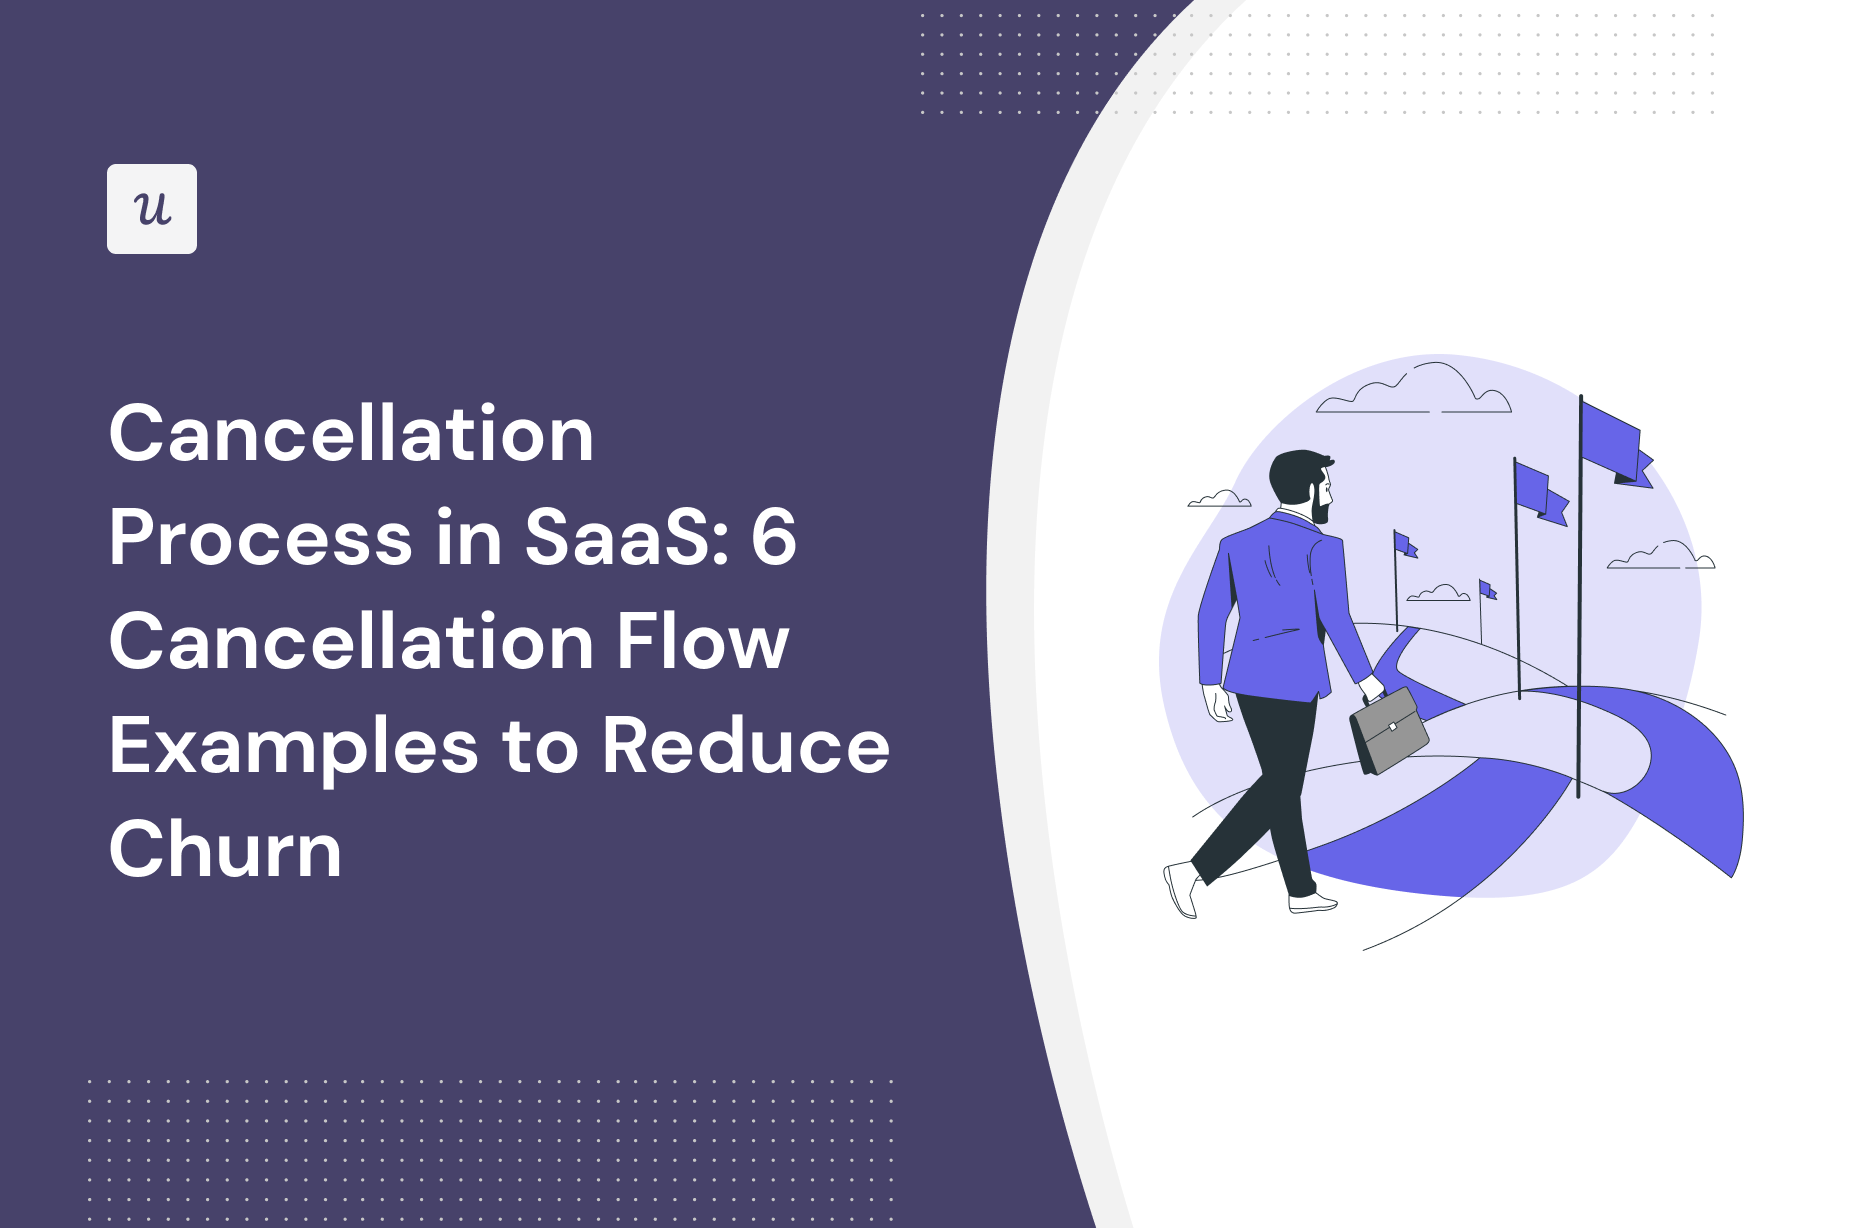 Cancellation Process in SaaS: 6 Cancellation Flow Examples to Reduce Churn